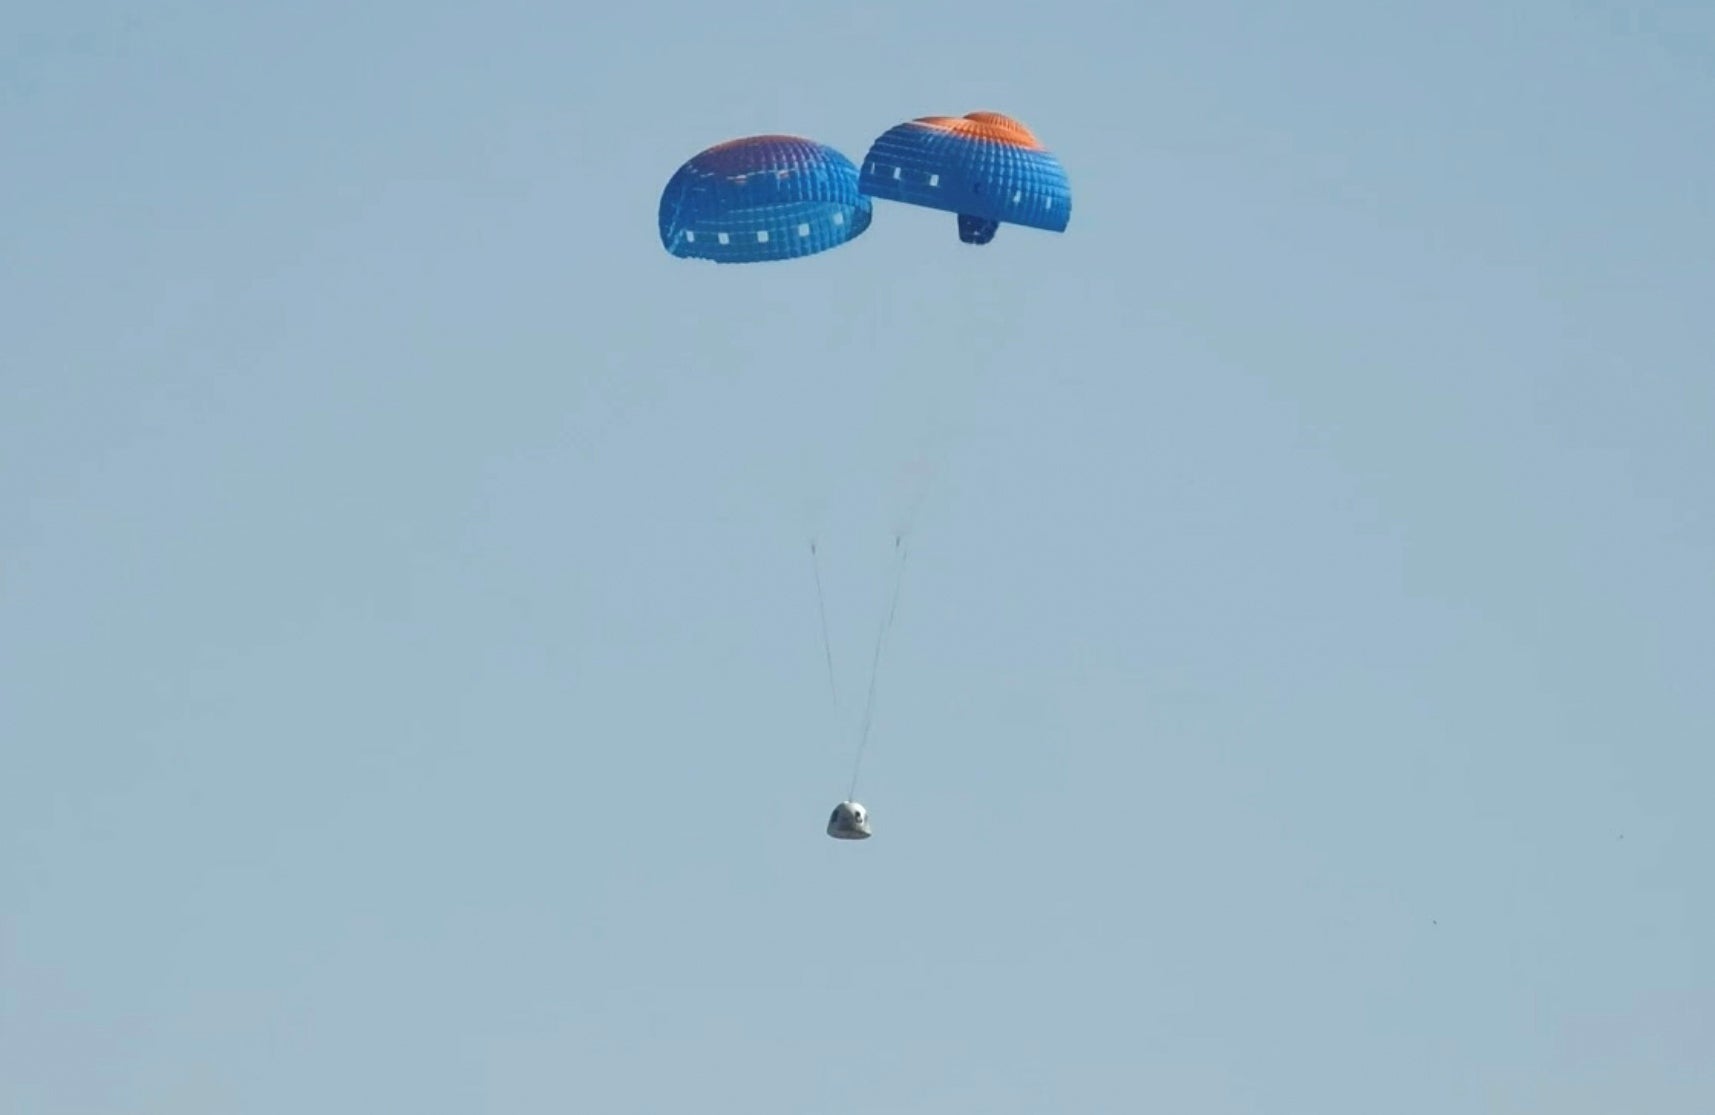 The Blue Origin space capsule carrying six passengers pictured parachuting to a safe landing on Sunday morning in Texas. The flight marked the first time since 2022 the company has sent people into space